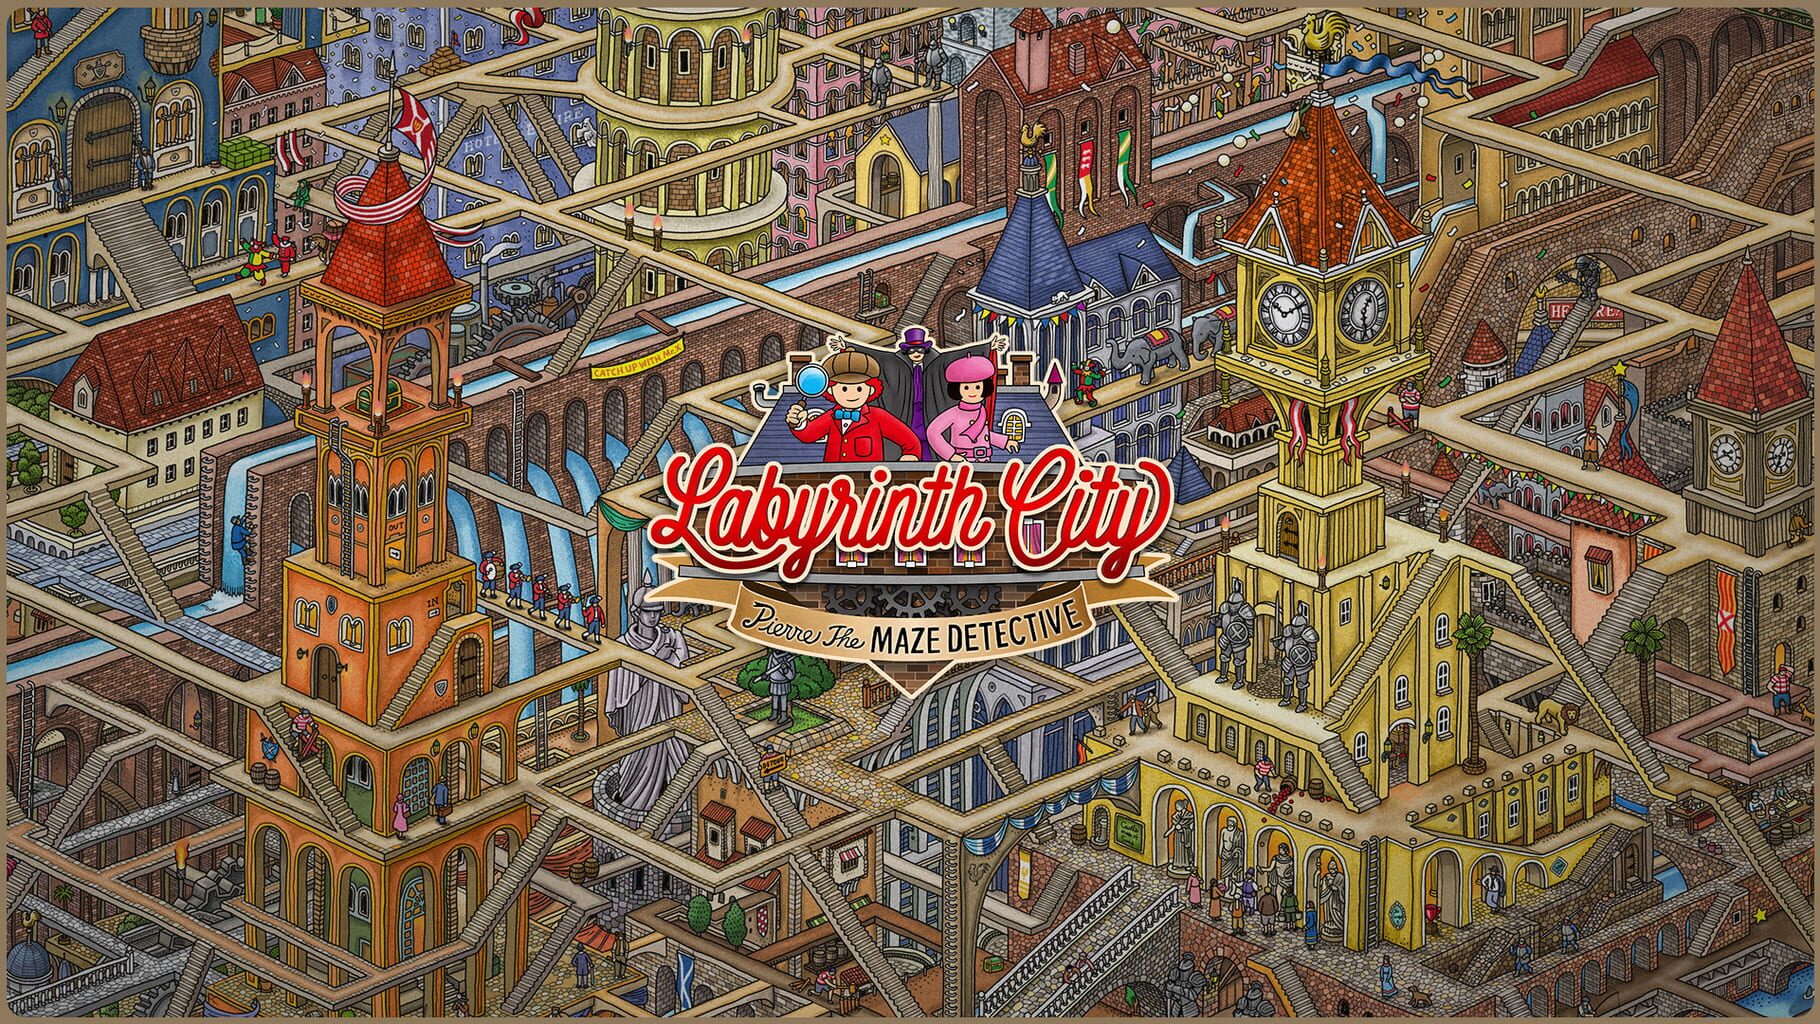 Artwork for Labyrinth City: Pierre the Maze Detective